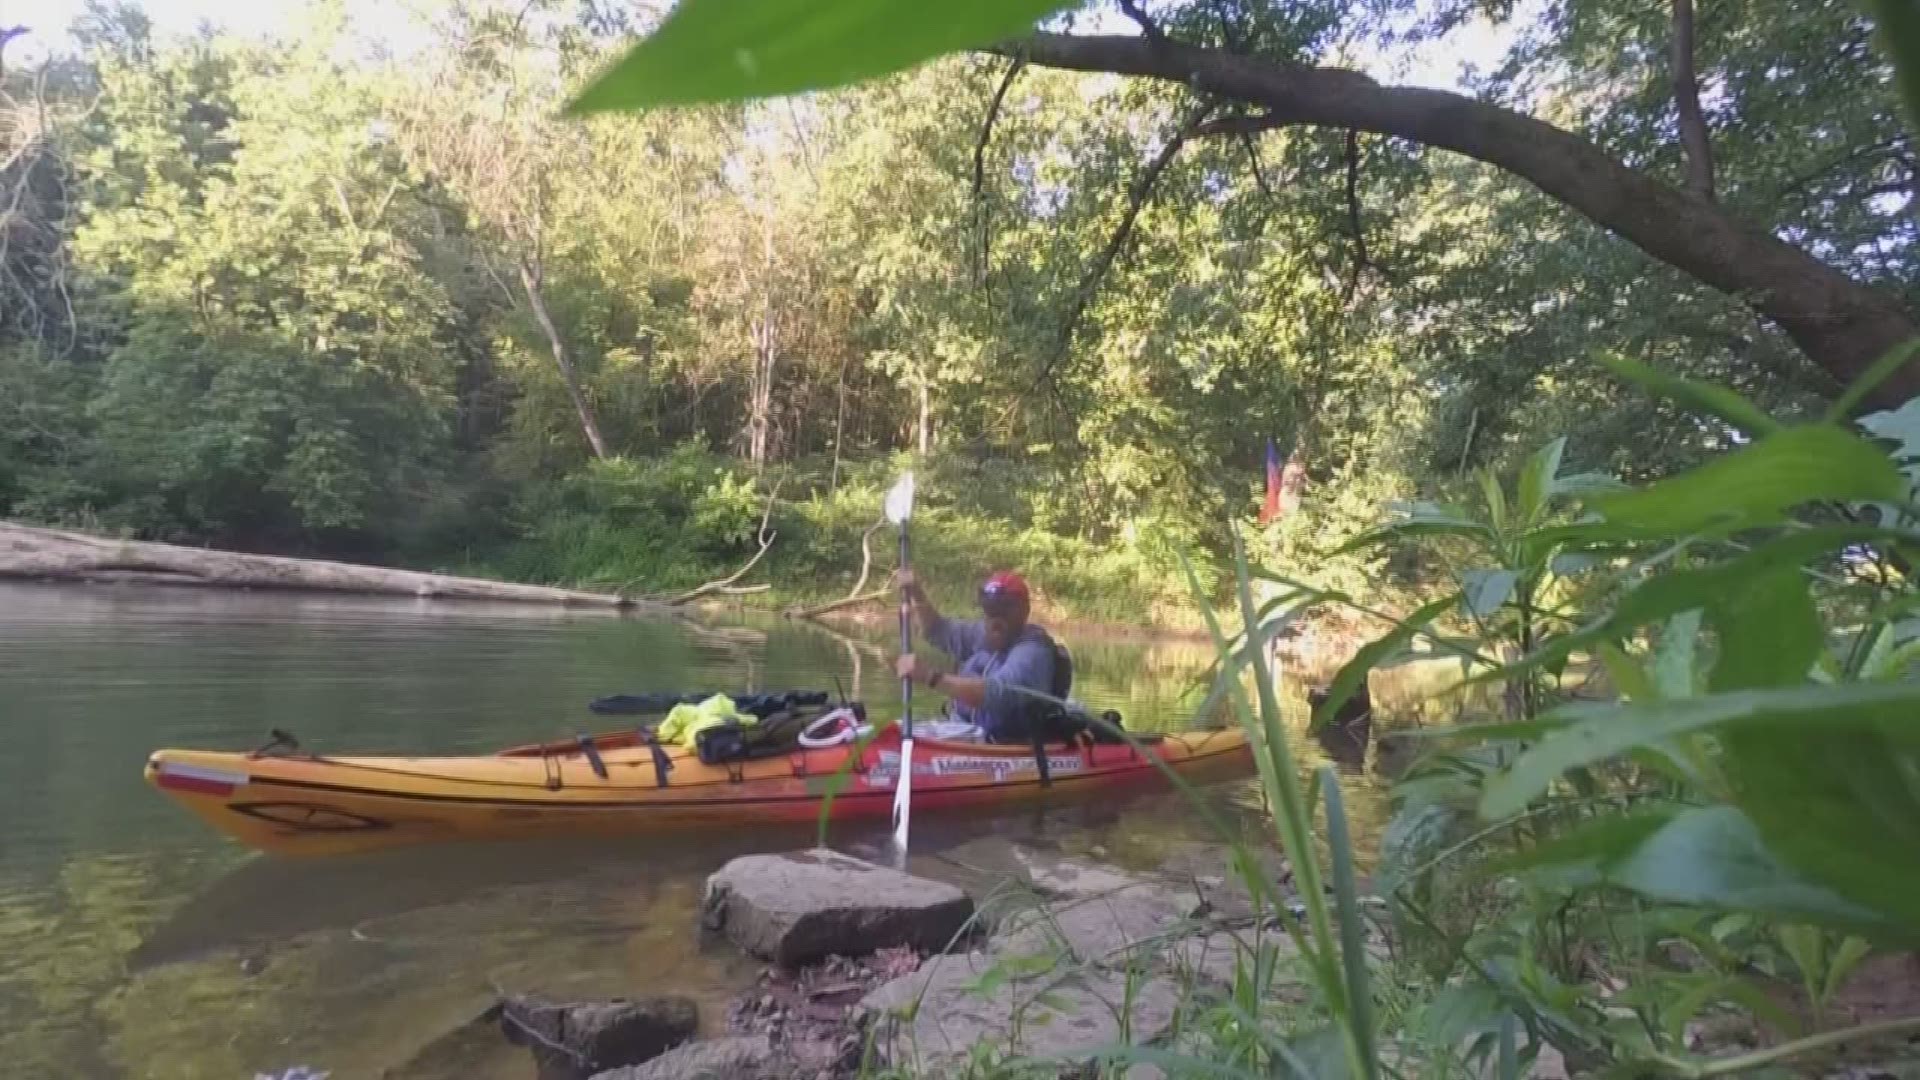 Joseph Solomon has paddled all the way from Pittsburgh, and his journey for mental health awareness is only half over.